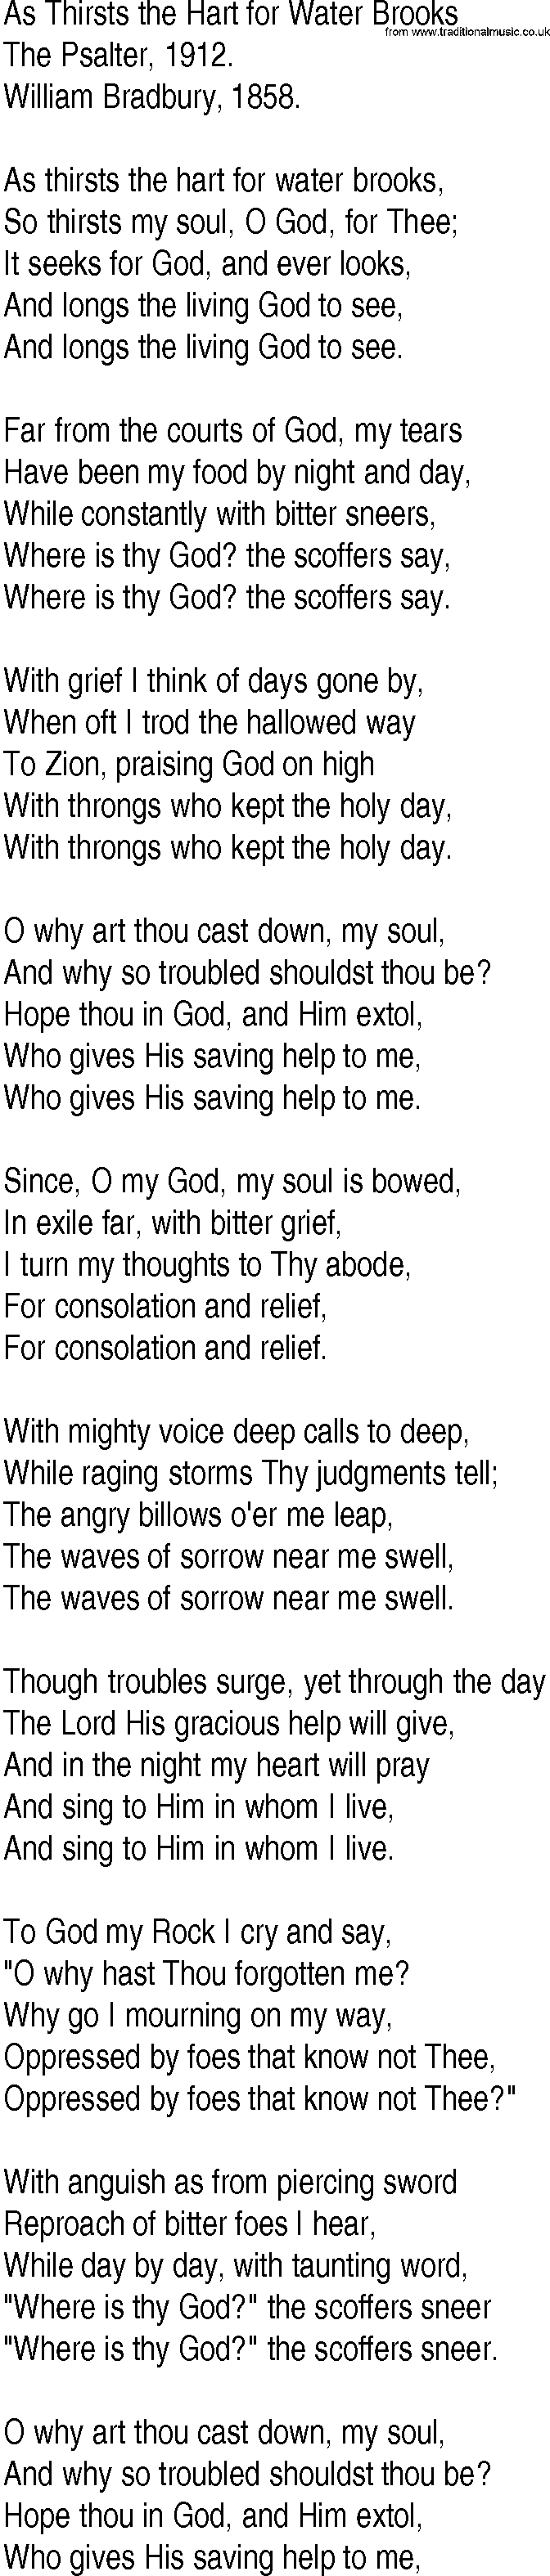 Hymn and Gospel Song: As Thirsts the Hart for Water Brooks by The Psalter lyrics